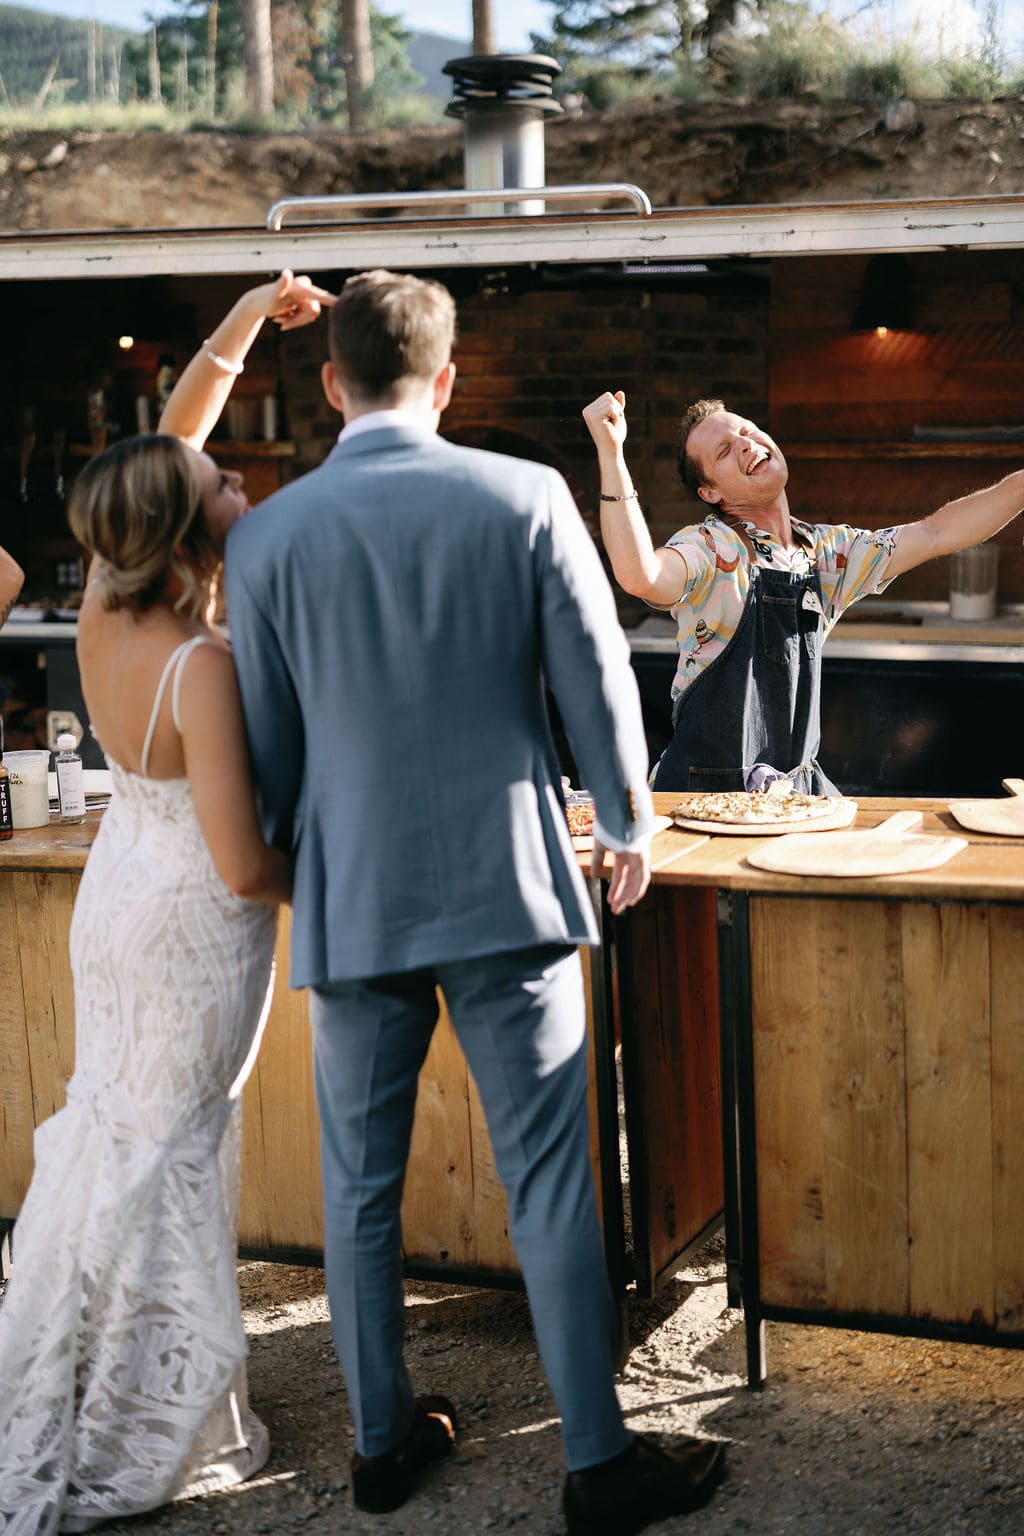 Ryan with Mountain Crust Catering Dances as he serves pizza to the happy couple